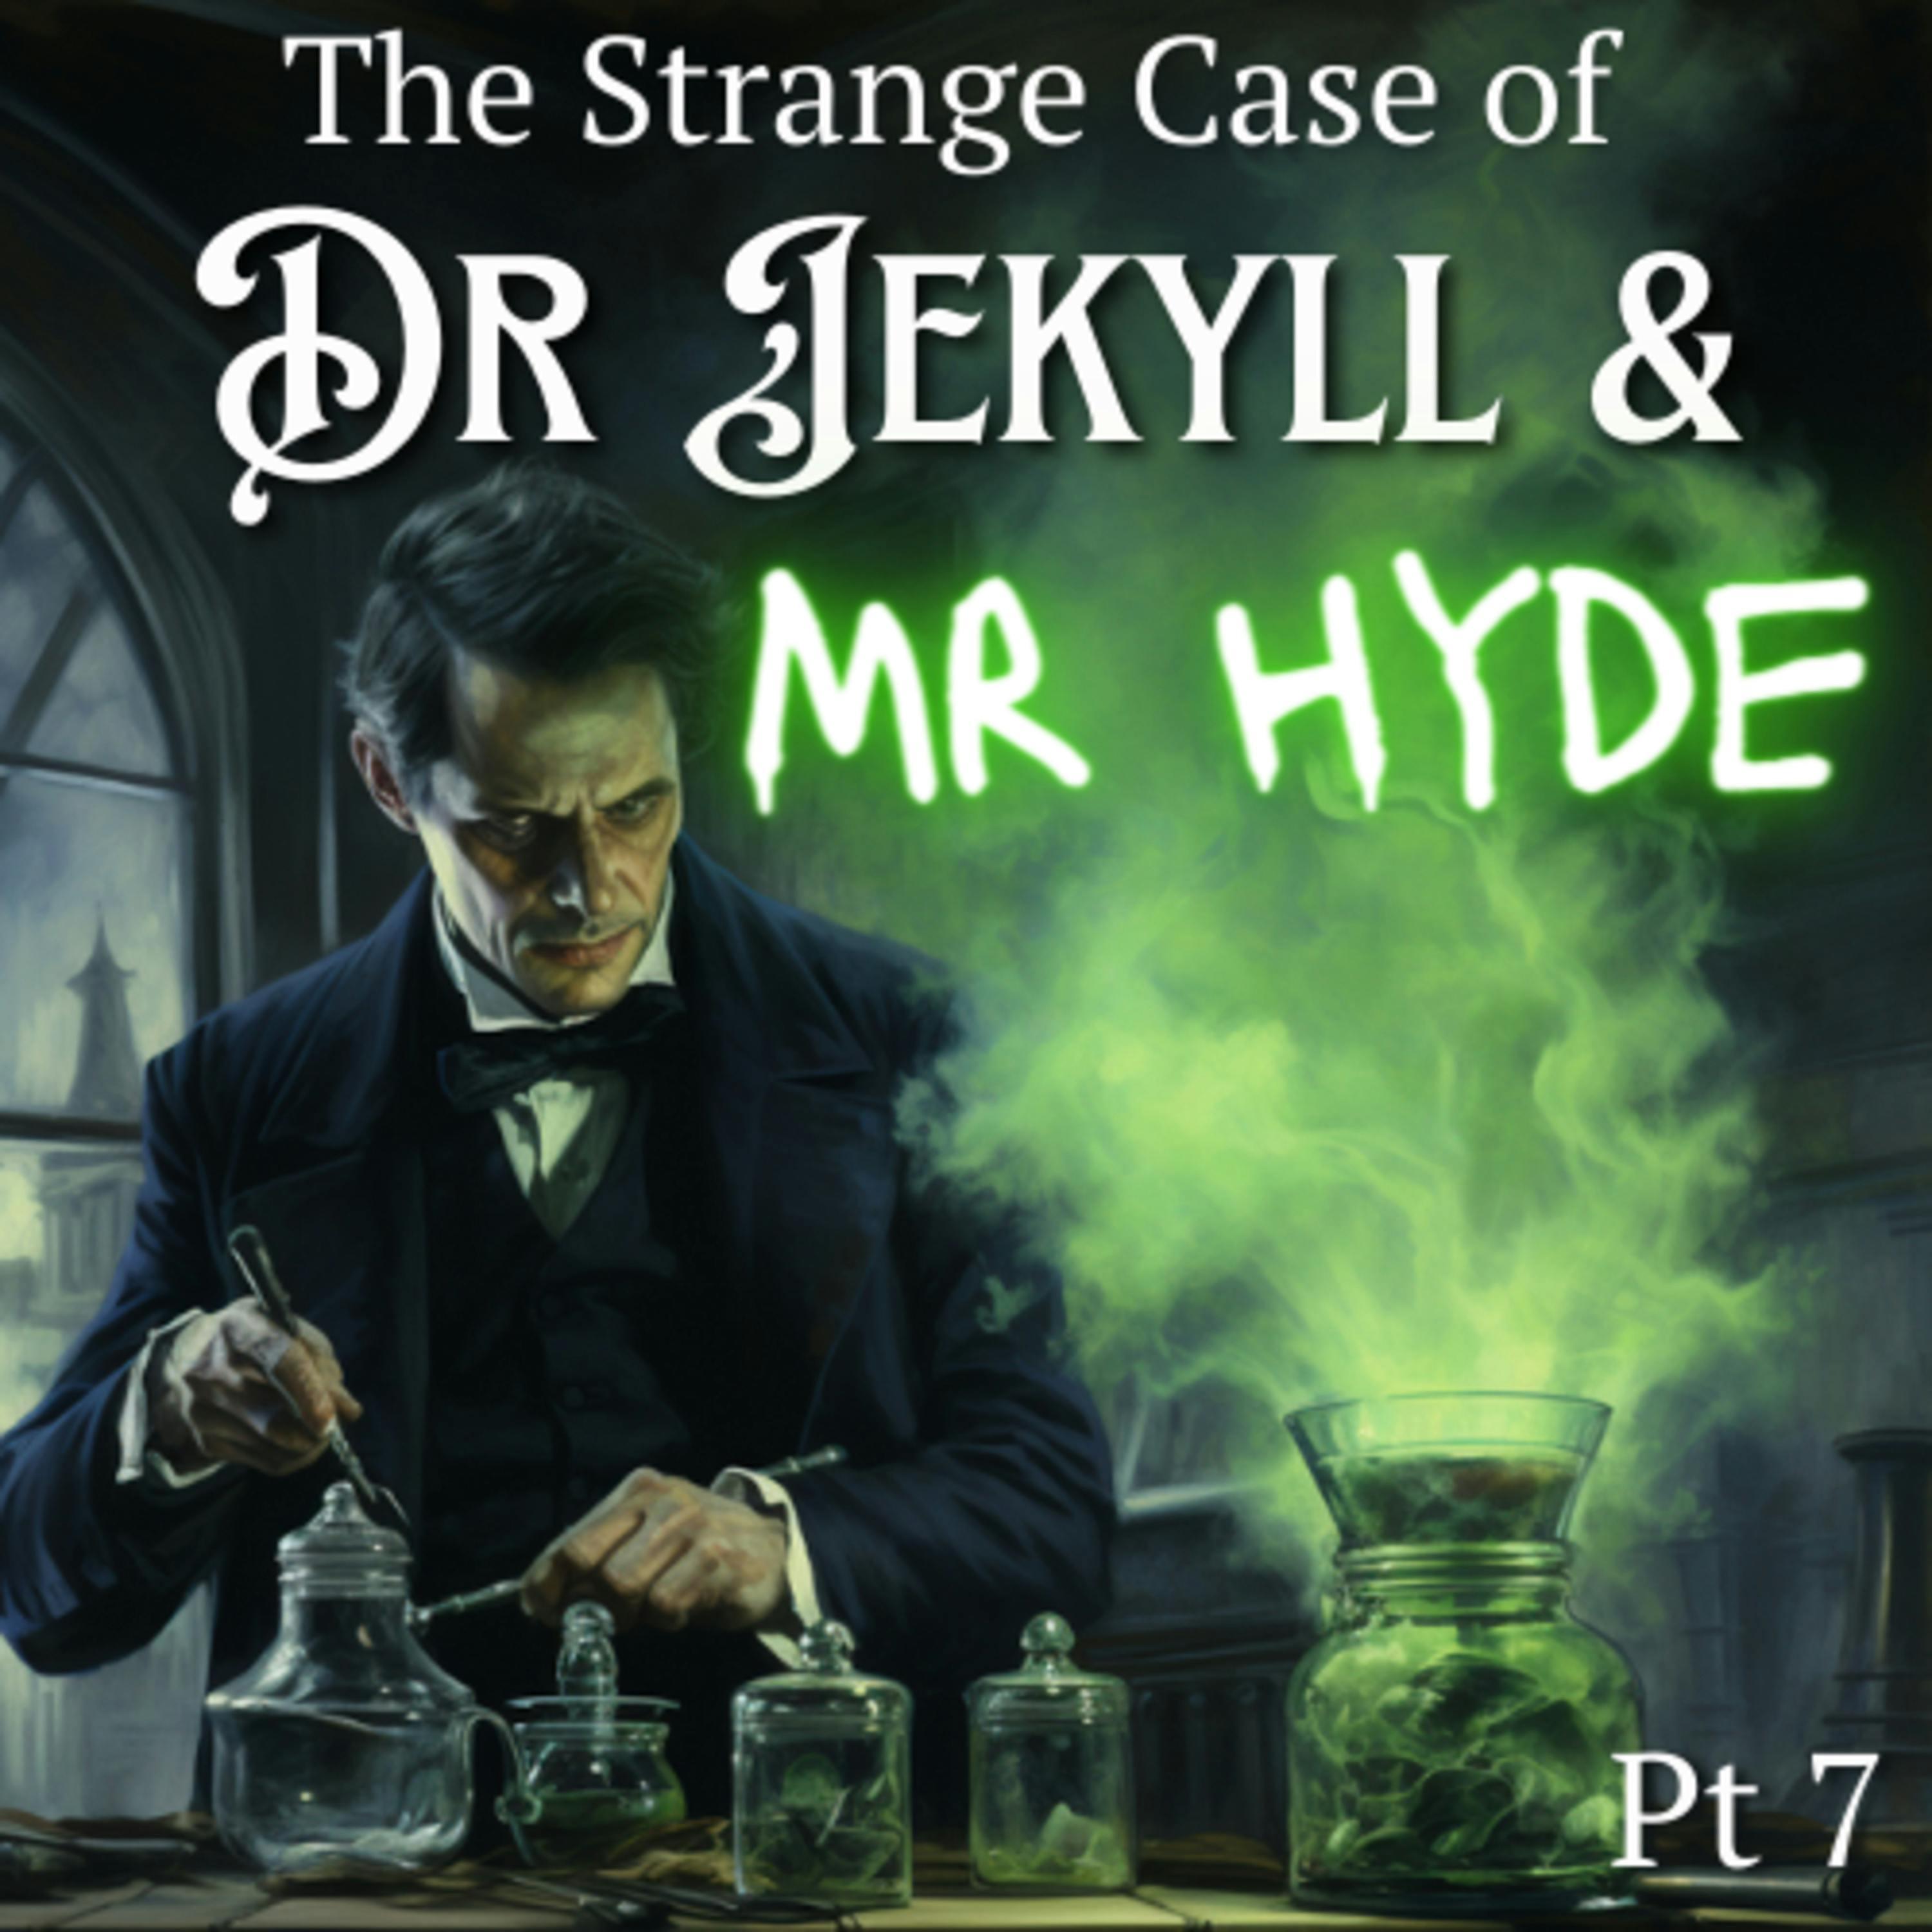 The Strange Case of Dr Jekyll and Mr Hyde Part 7